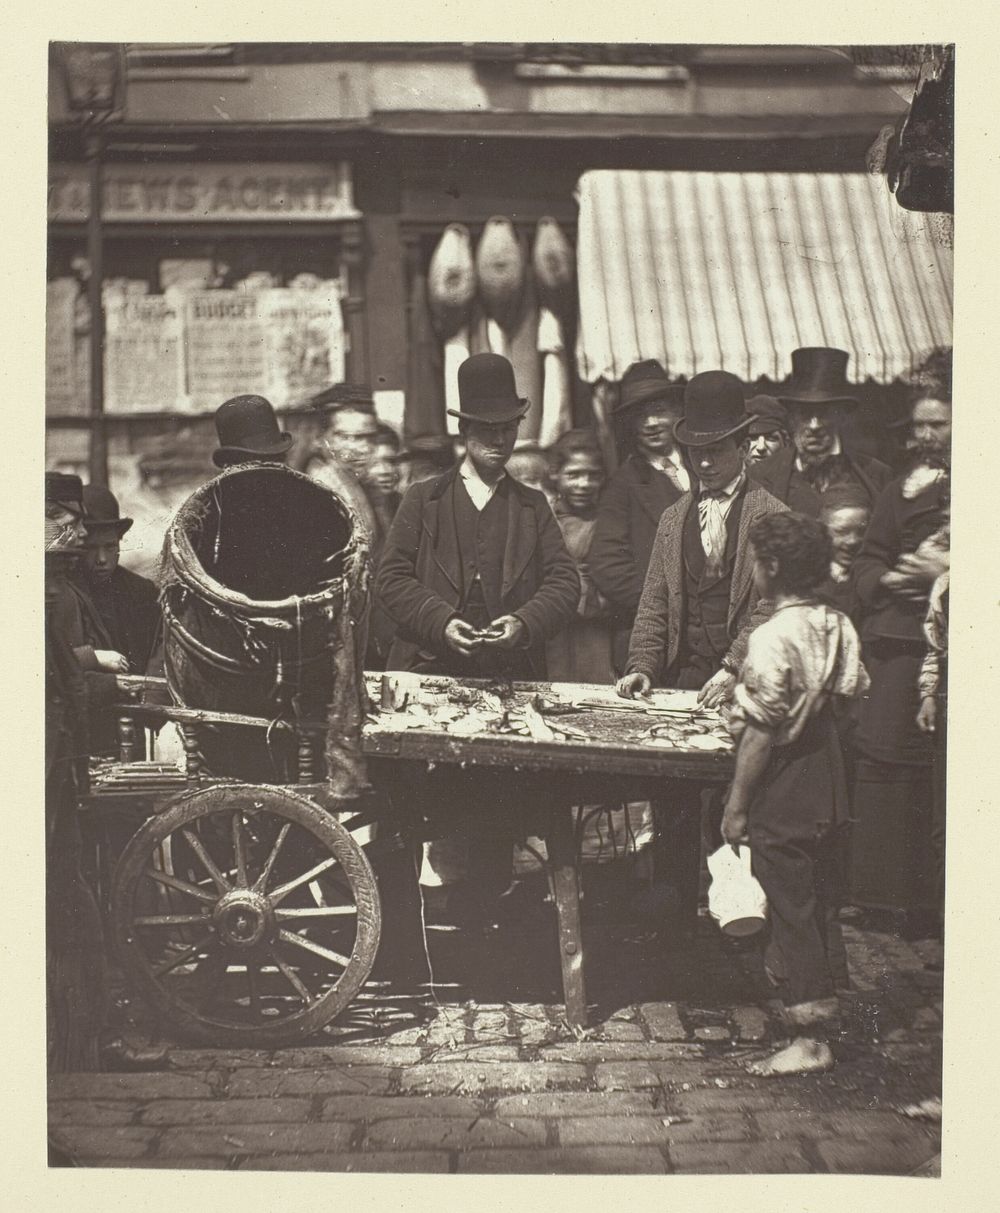 Cheap Fish of St. Giles's by John Thomson (Photographer)